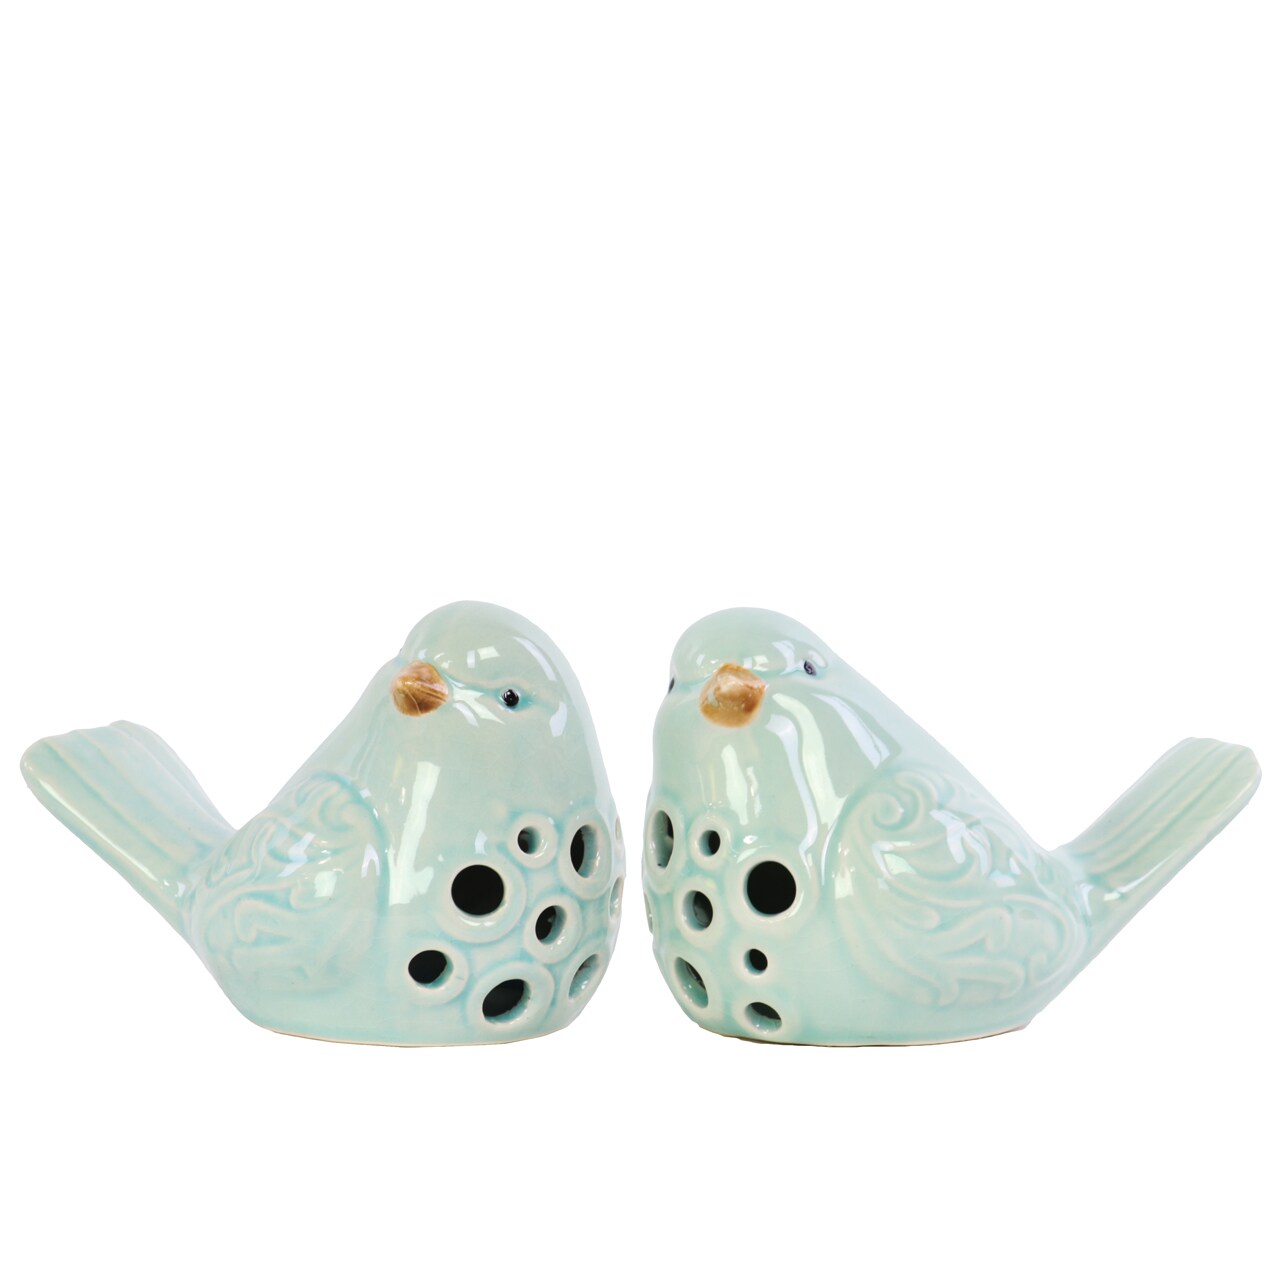 Urban Trends Ceramic Bird Figurine with Embossed Cutout Design Assortment of Two Gloss Finish Turquoise